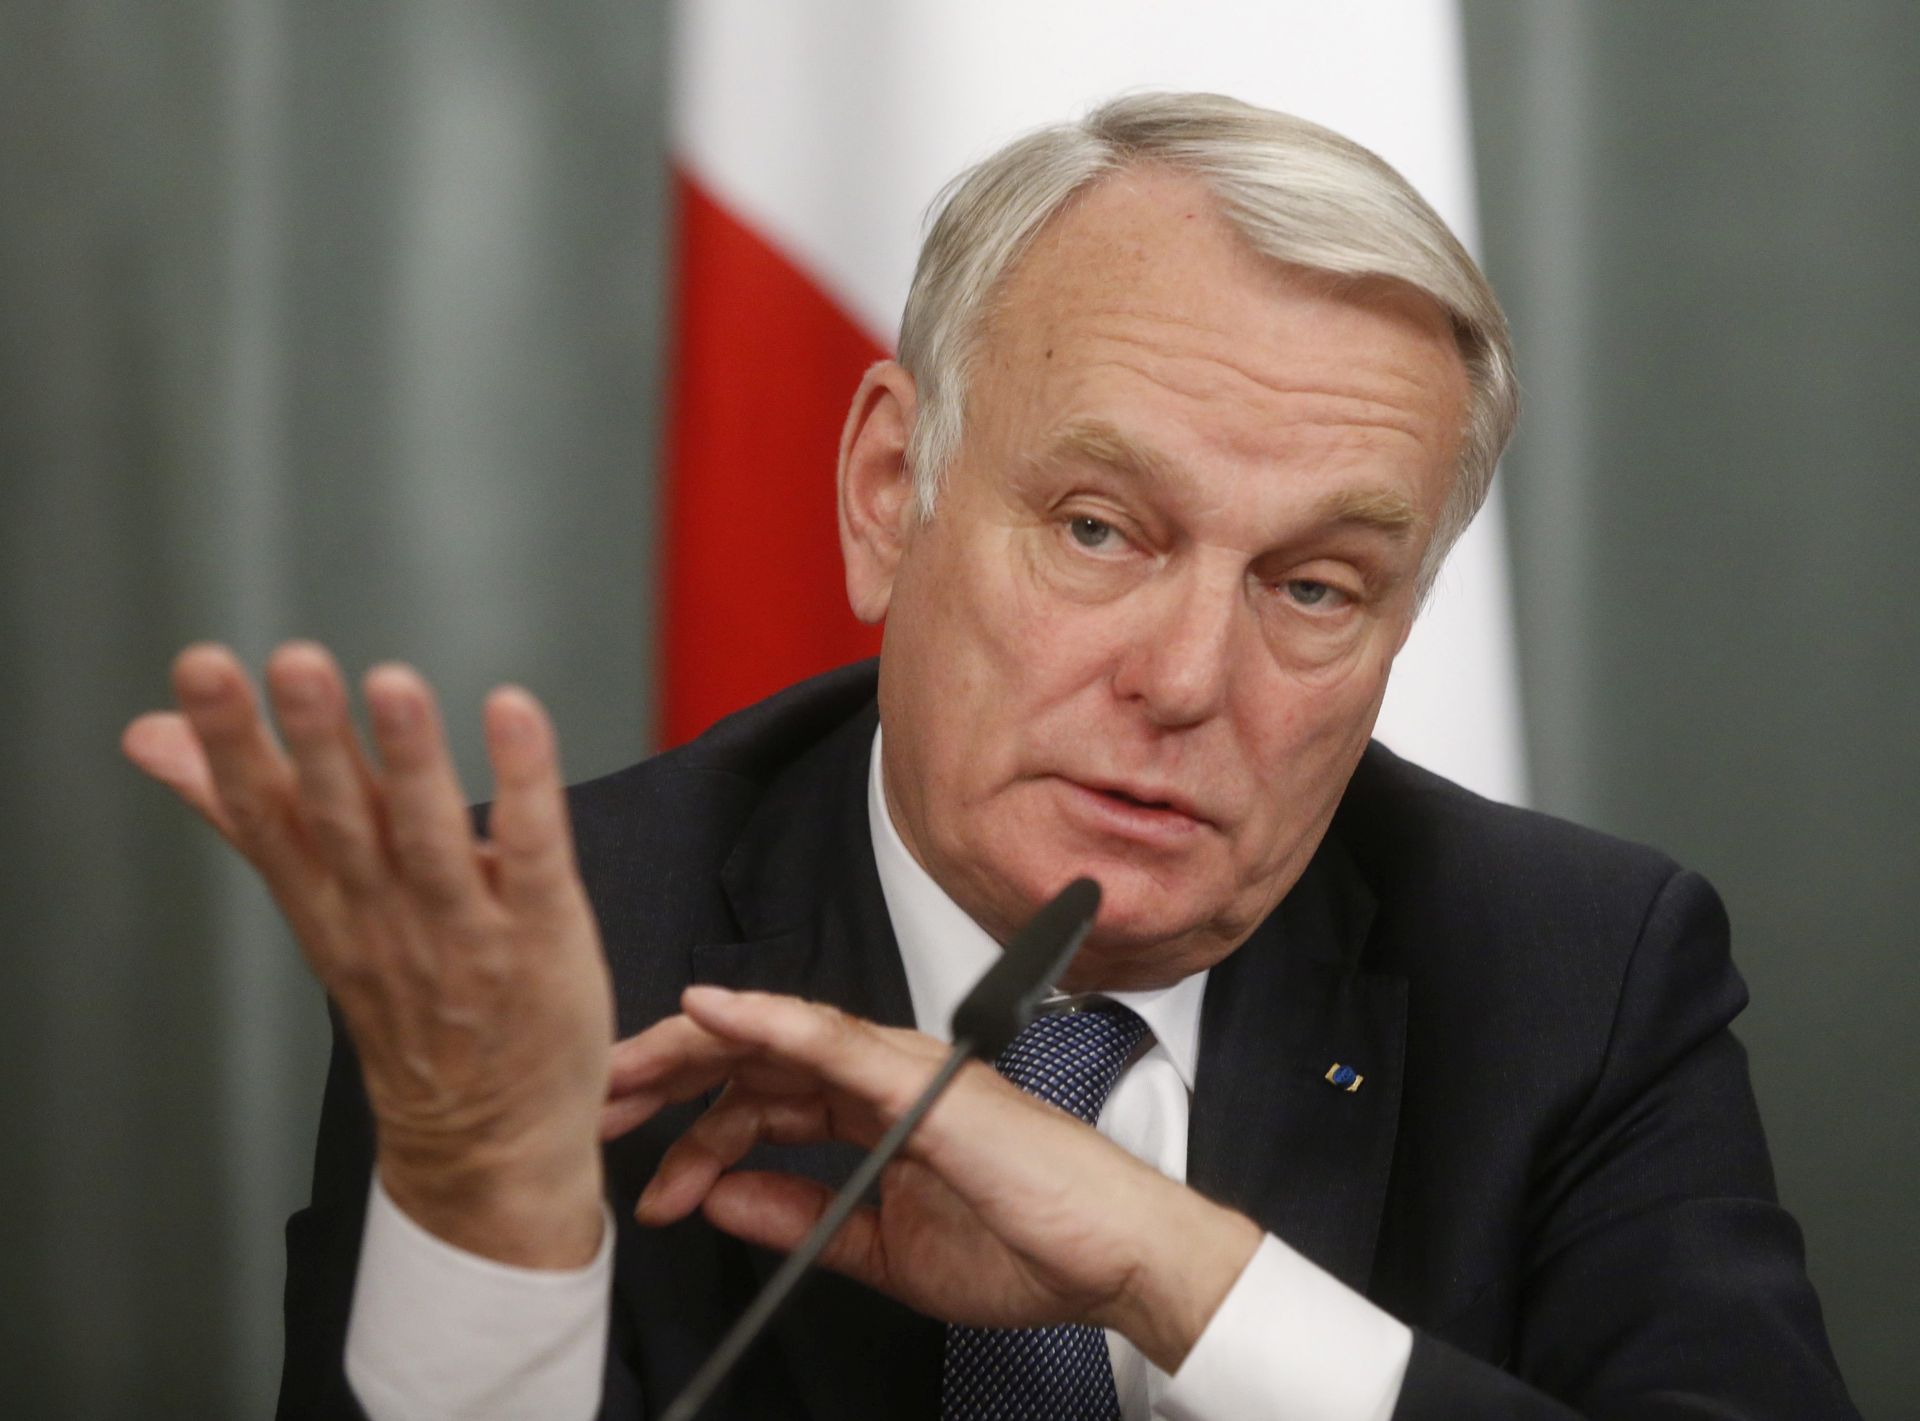 epa05267563 French Foreign Minister Jean-Marc Ayrault speaks during a press conference after his talks with Russian Foreign Minister Sergei Lavrov (not pictured) at Russian Foreign Ministry guest house in Moscow, Russia, 19 April 2016.  EPA/SERGEI CHIRIKOV